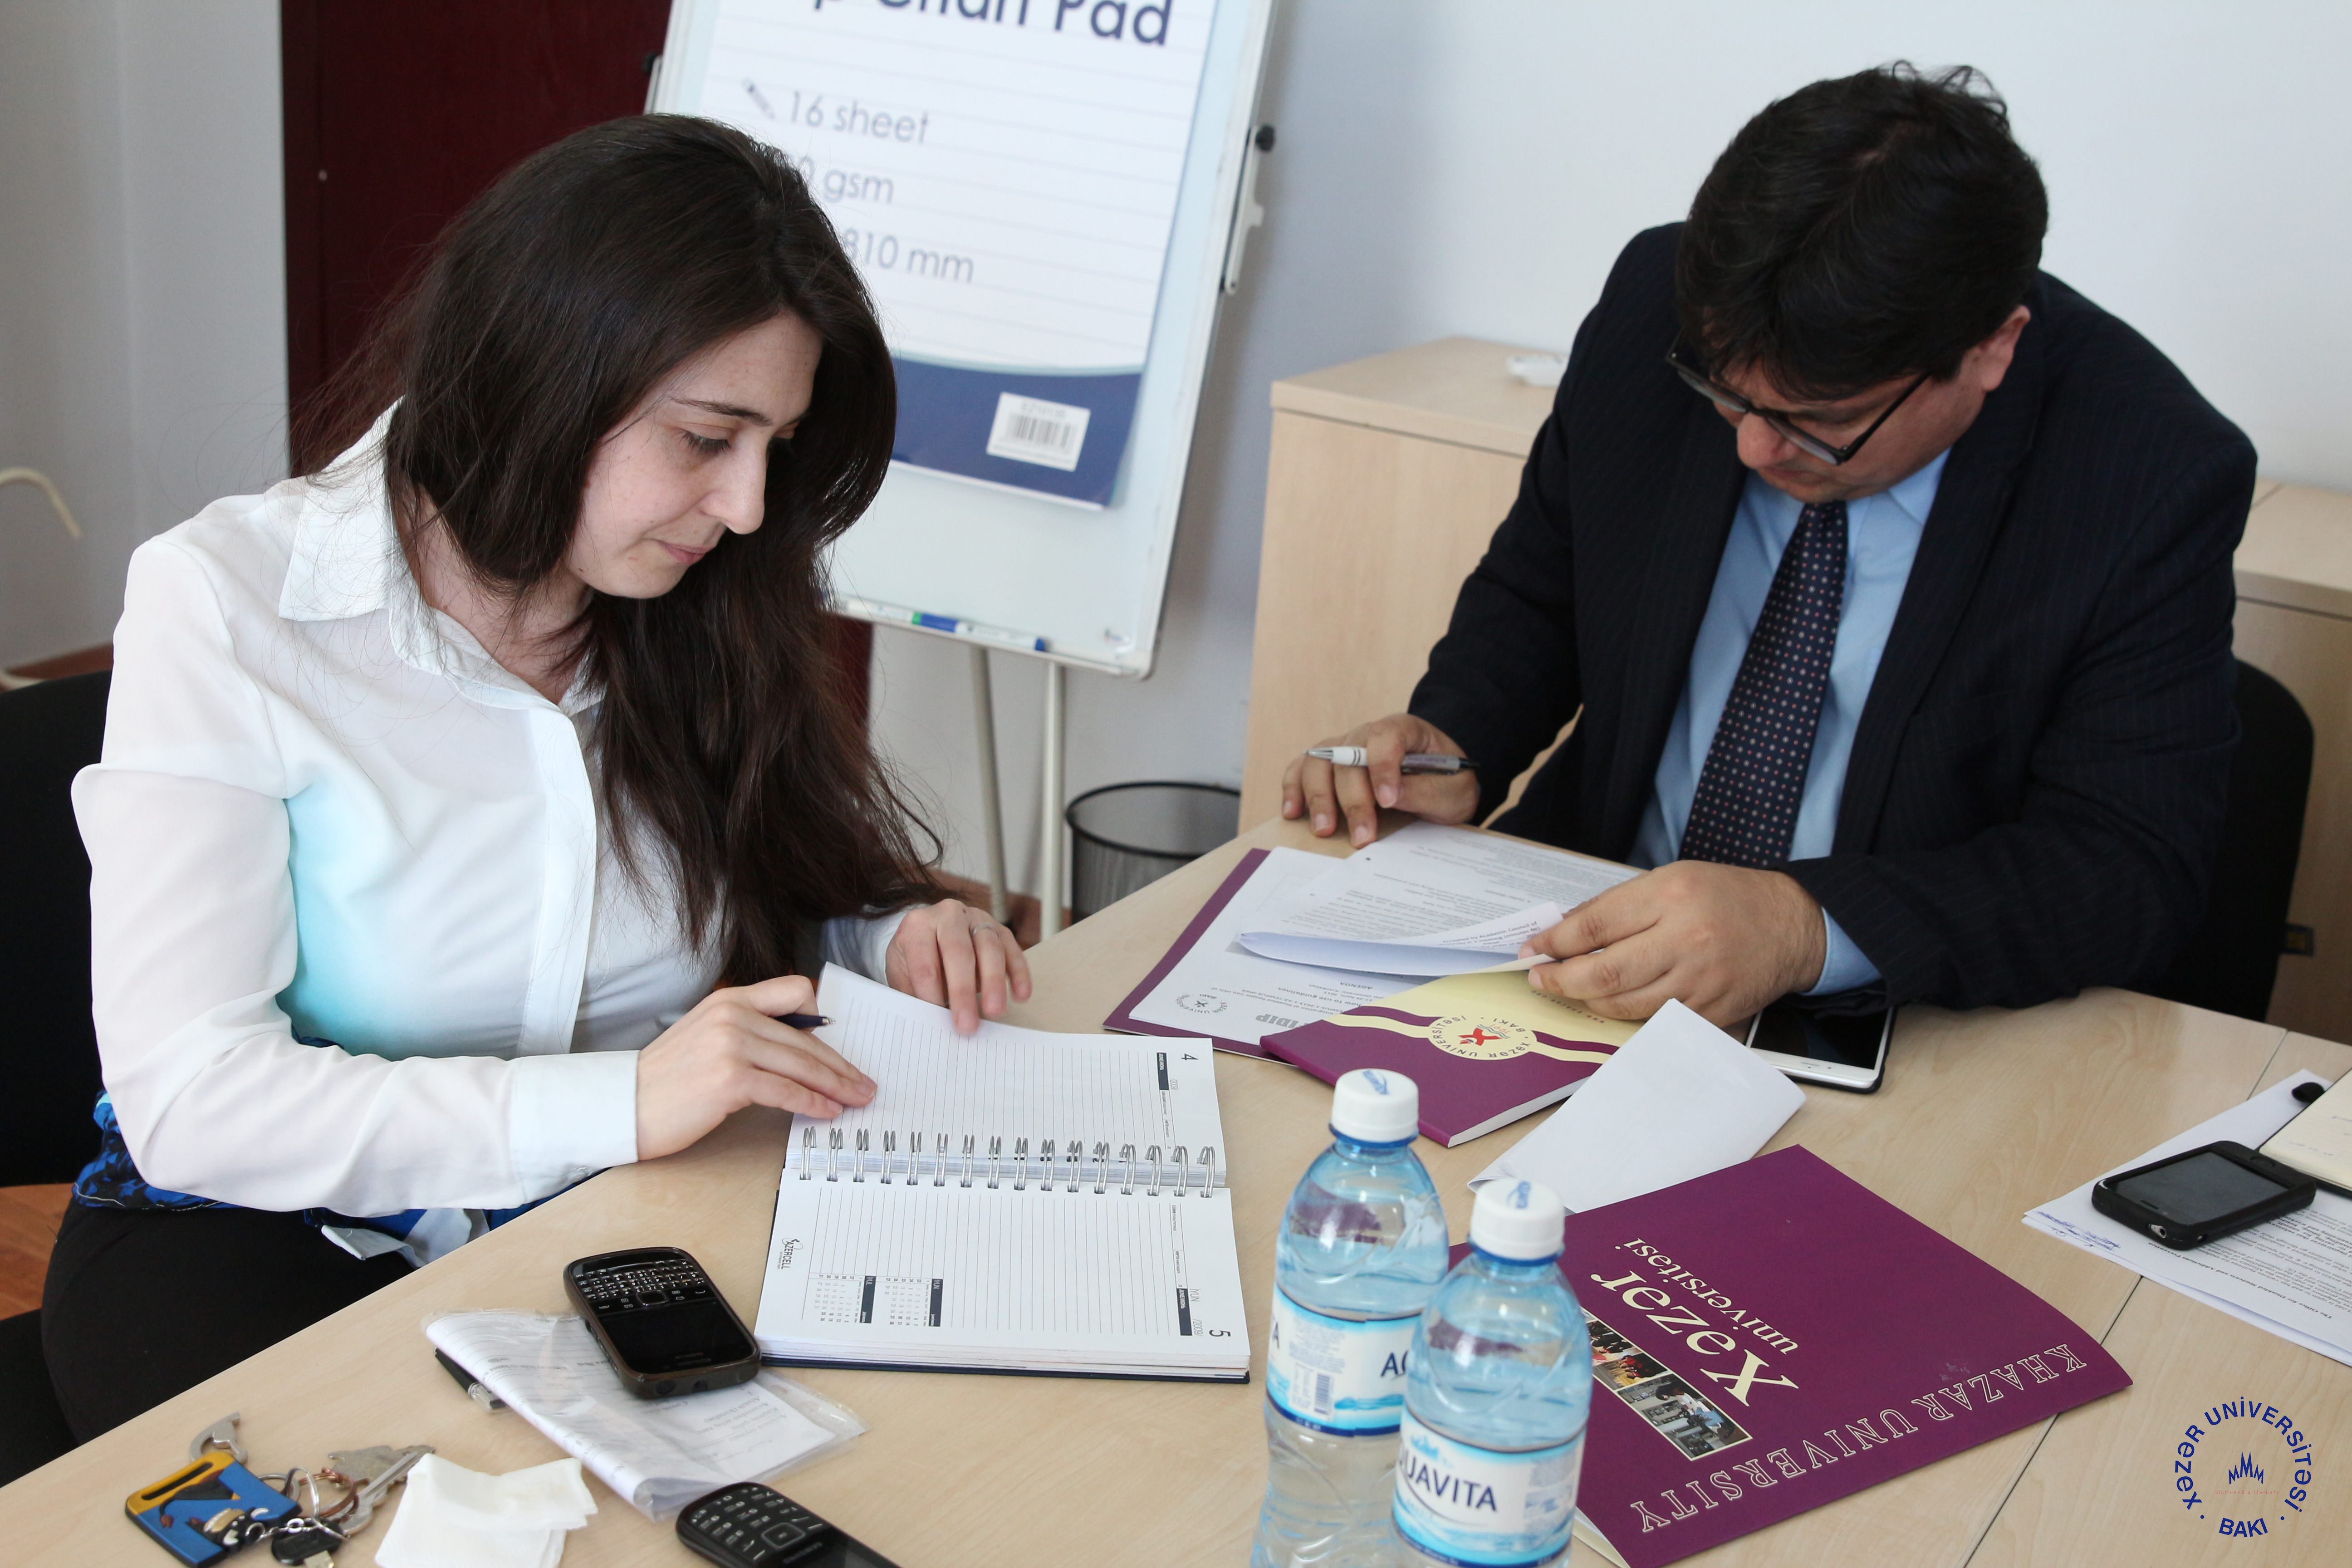 27 April 2015 Tempus seminar dedicated to preoject ” The Establishment of a Foundation for the Integration of Disabled People into HEIs of Azerbaijan , at Khazar University.